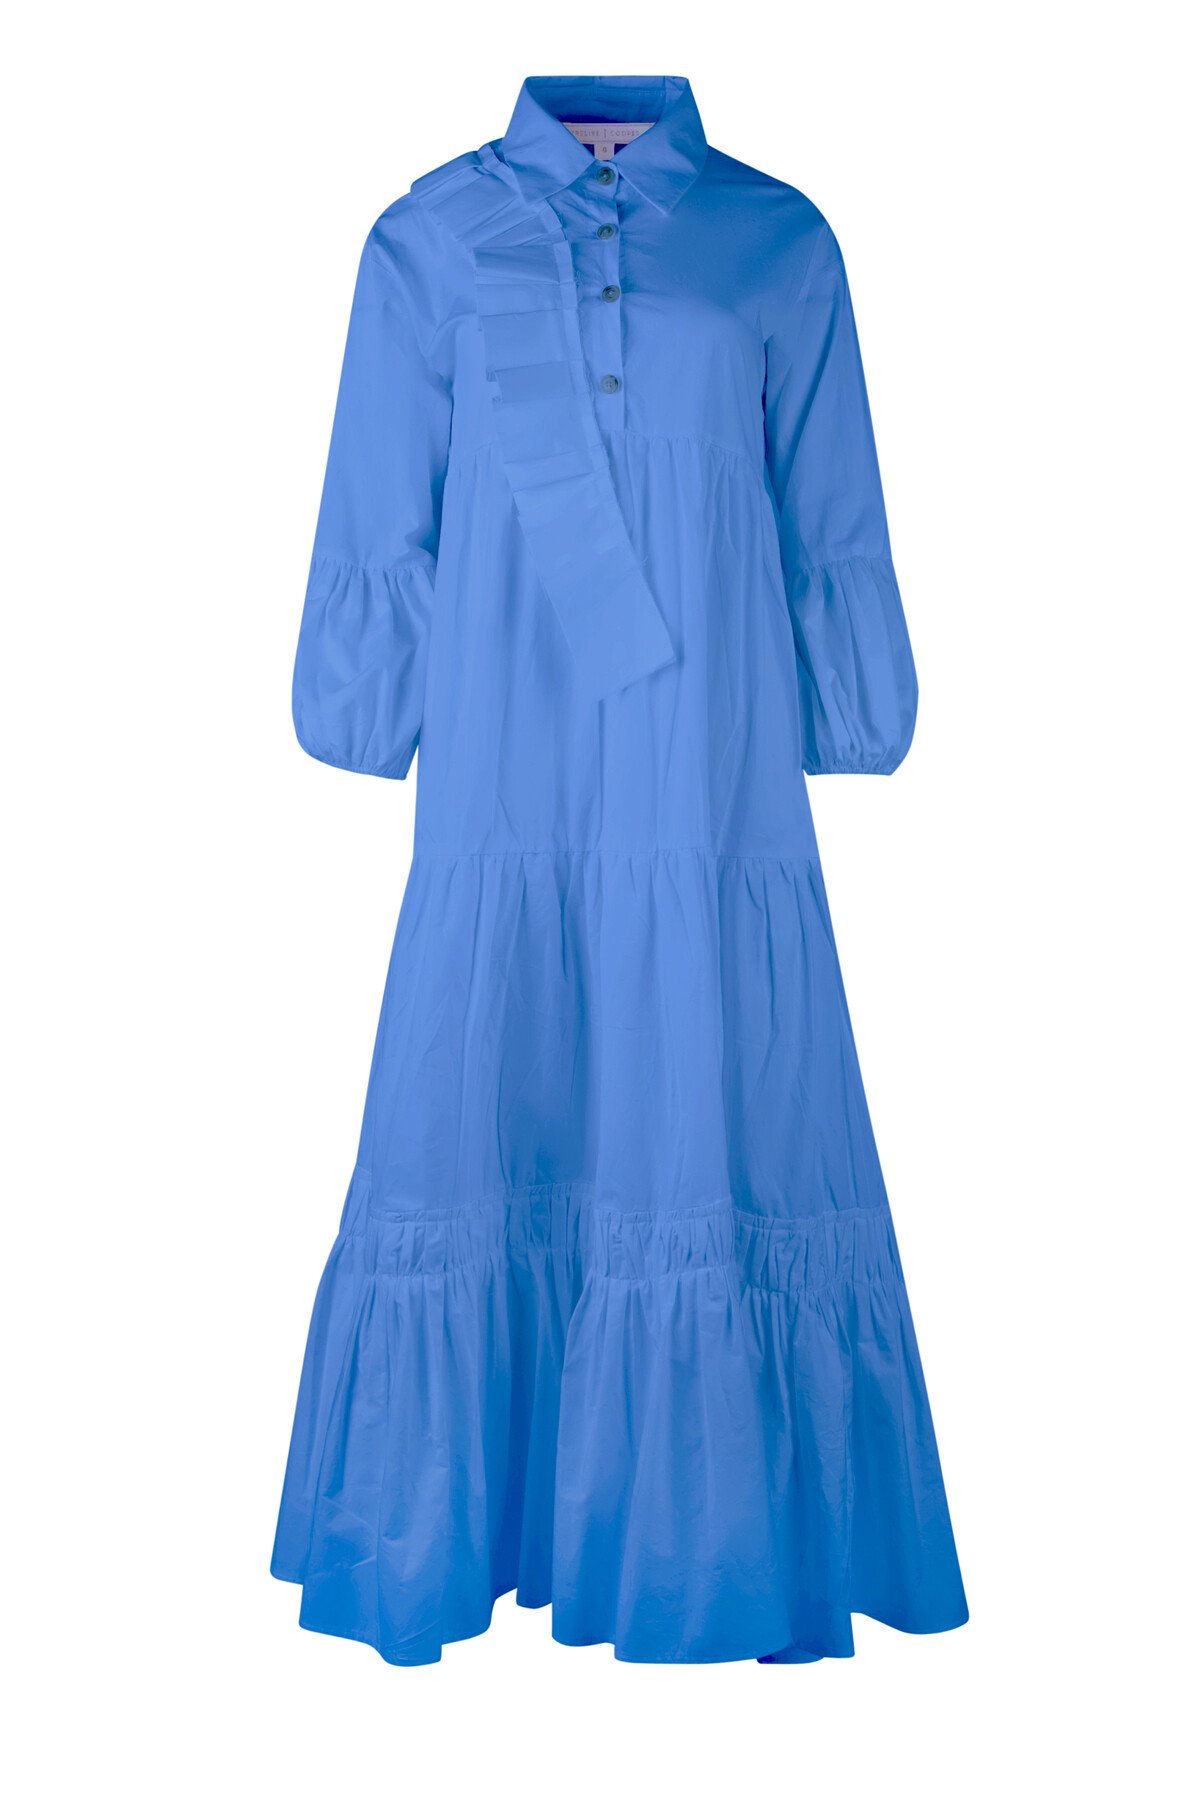 GIVE A PUFF DRESS (CORNFLOWER BLUE)- TRELISE COOPER SPRING 22 Boxing ...